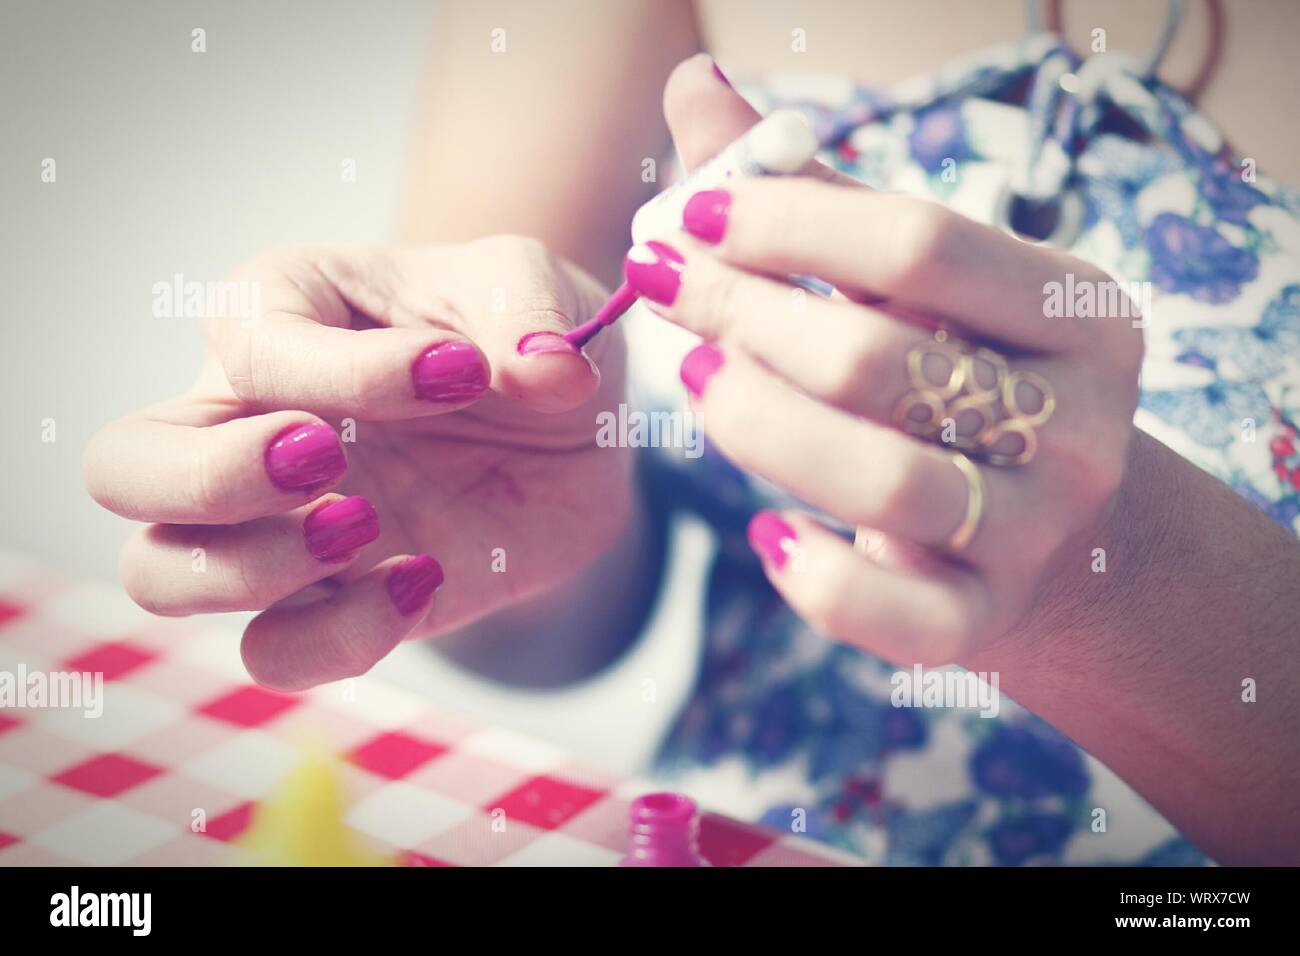 Midsection Of Woman Painting Fingernails Stock Photo